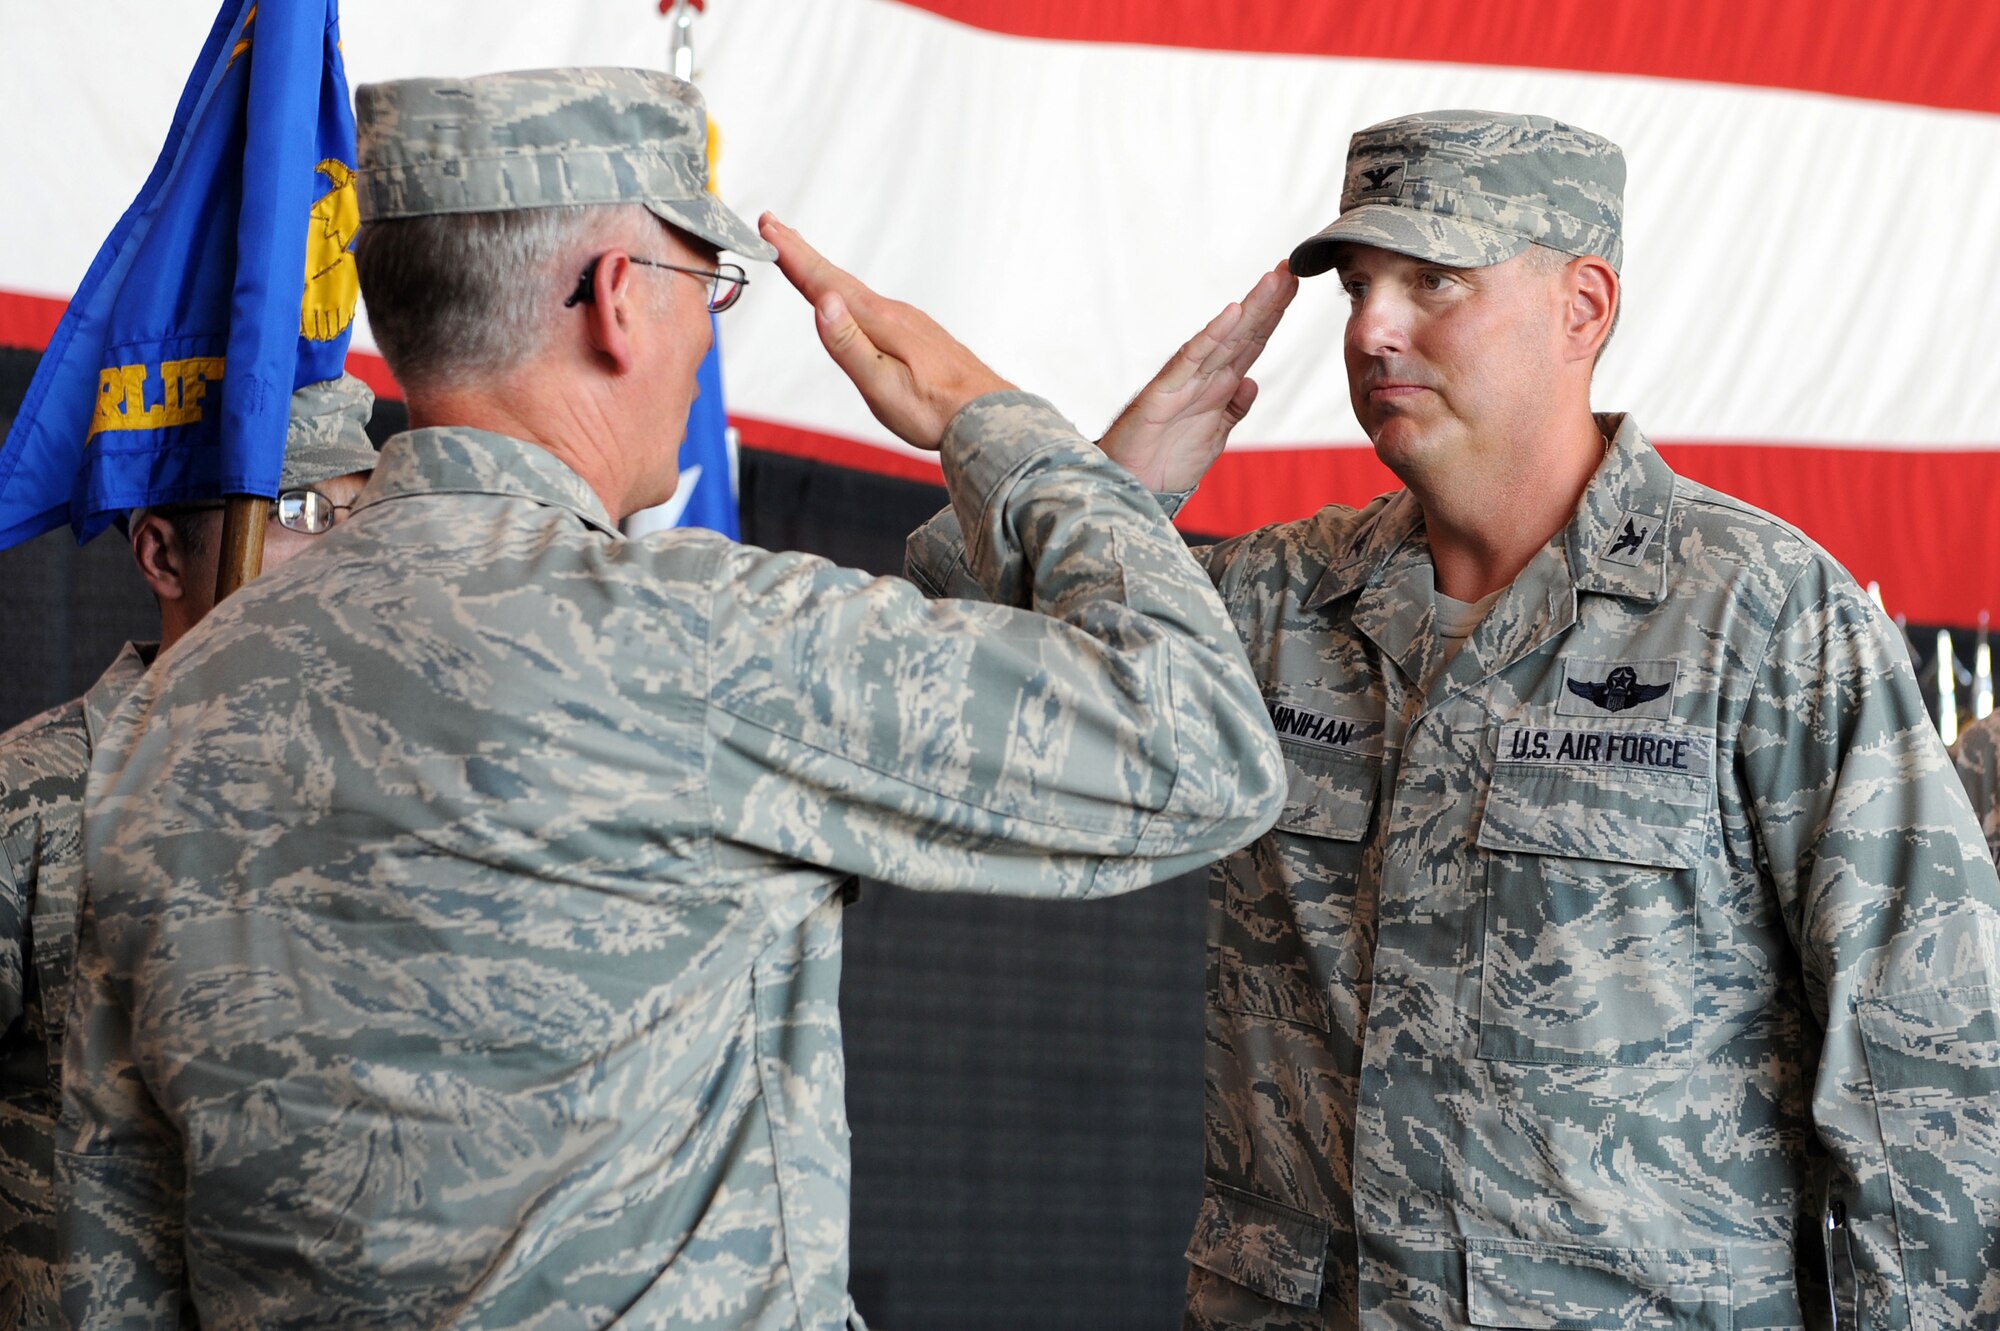 Col. Michael Minihan (right), 19th Airlift Wing commander, returns a salute to Lt. Gen. Robert Allardice, 18th Air Force commander, during a change of command ceremony here Aug. 2.  The 19th AW is the host unit to the largest C-130 base in the world.  (U.S. Air Force photo by Senior Airman Steele C.G. Britton)